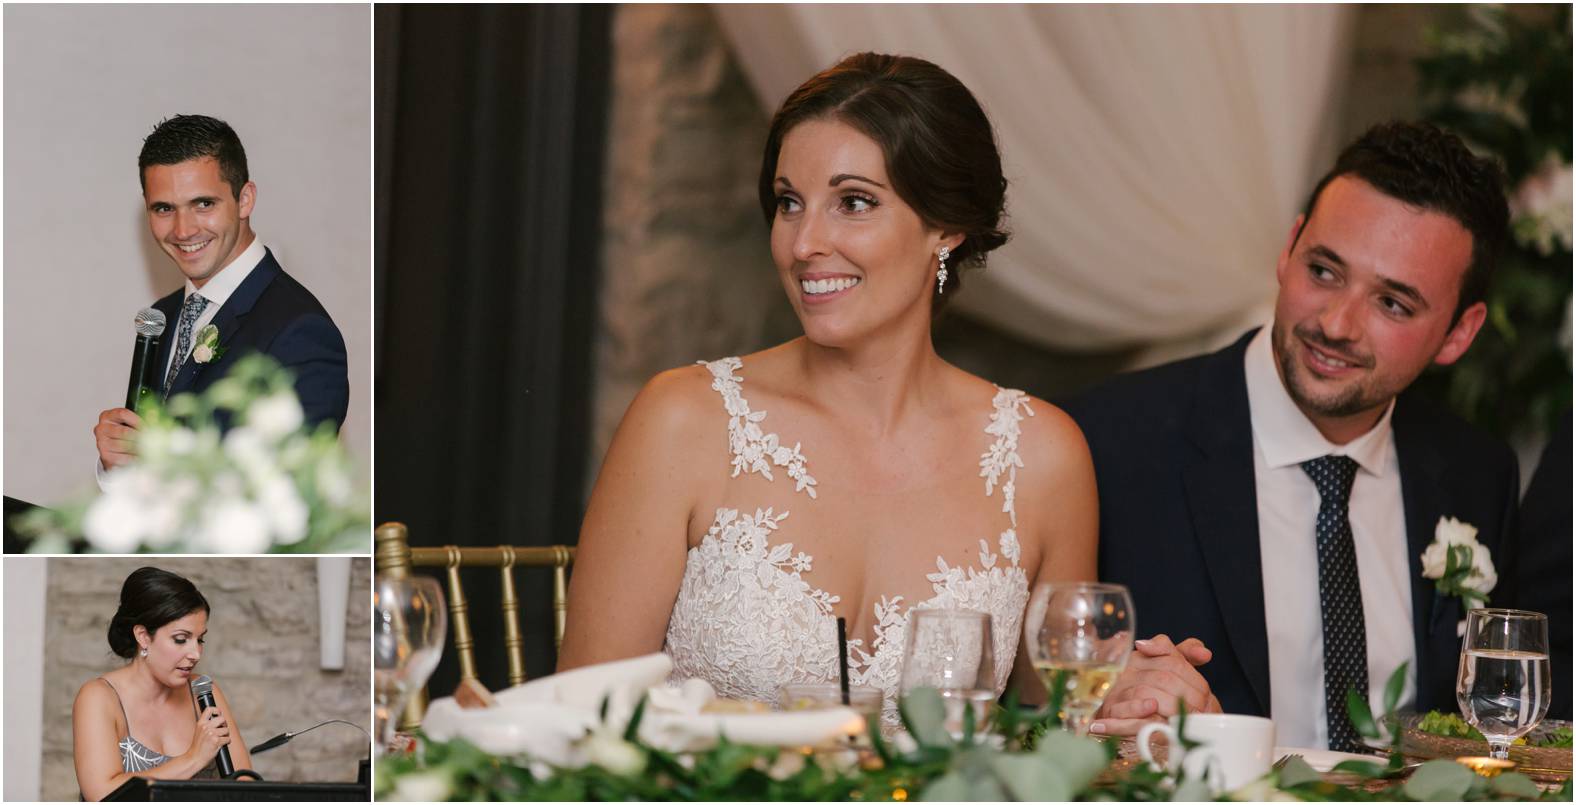 Bride and groom react to wedding speeches